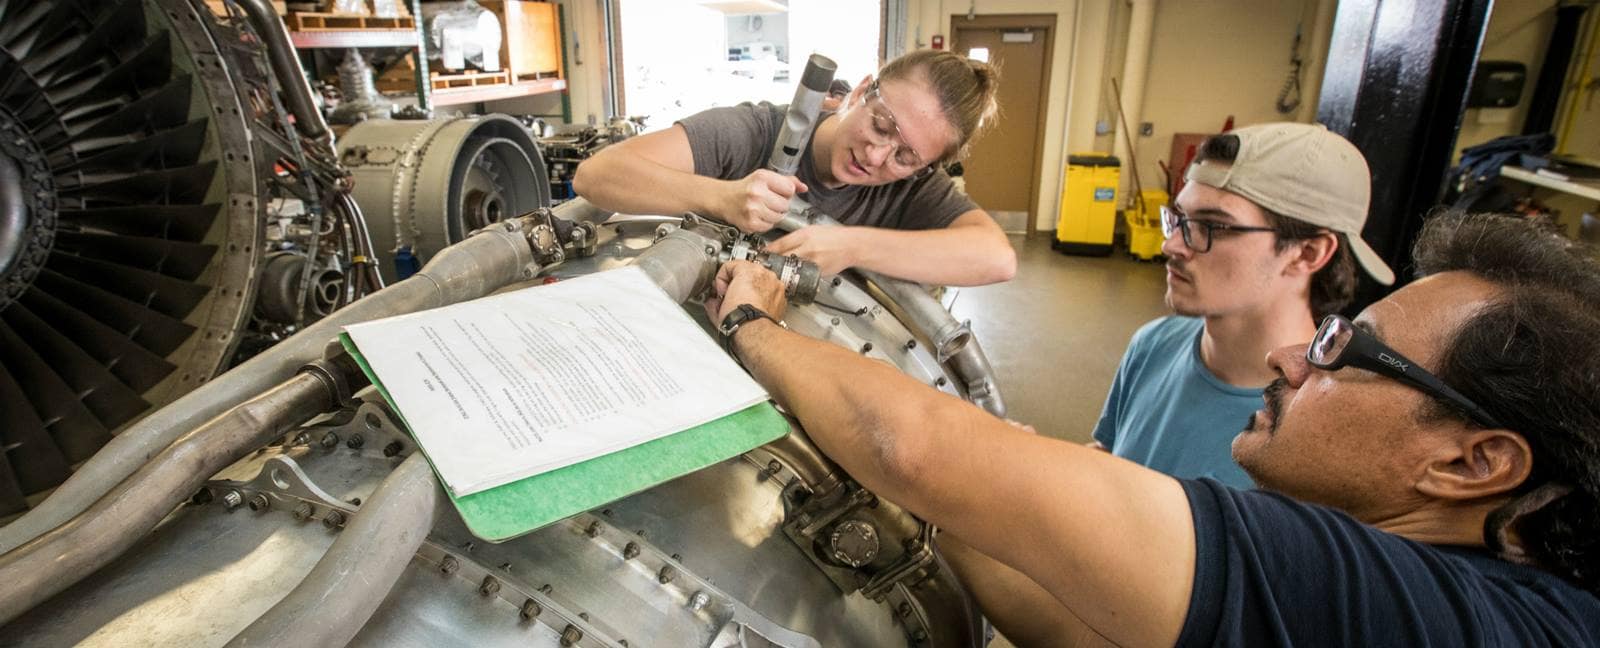 Bachelor's Degree In Aviation Maintenance Science | Embry-Riddle  Aeronautical University